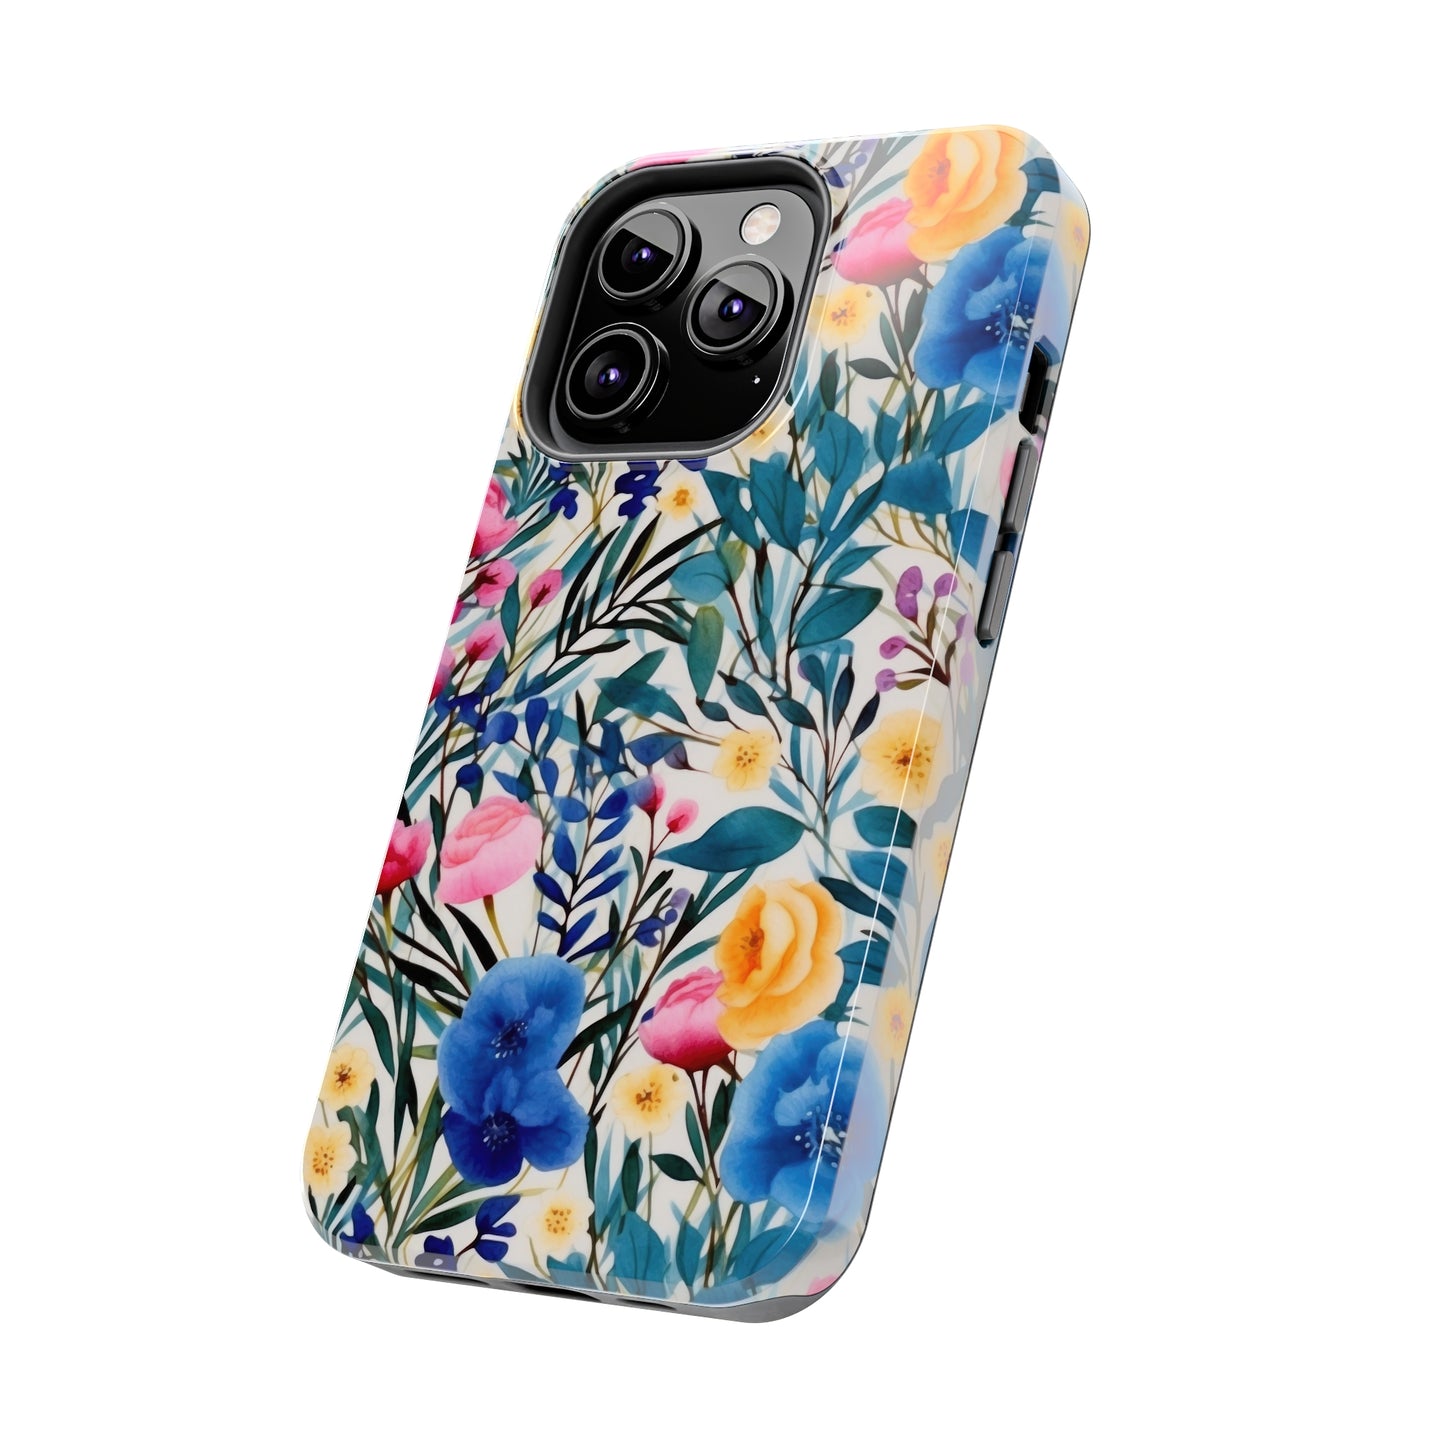 Blooming Brilliance: Large Watercolor Floral Design in Blue, Yellow, and Pink Iphone Tough Phone Case